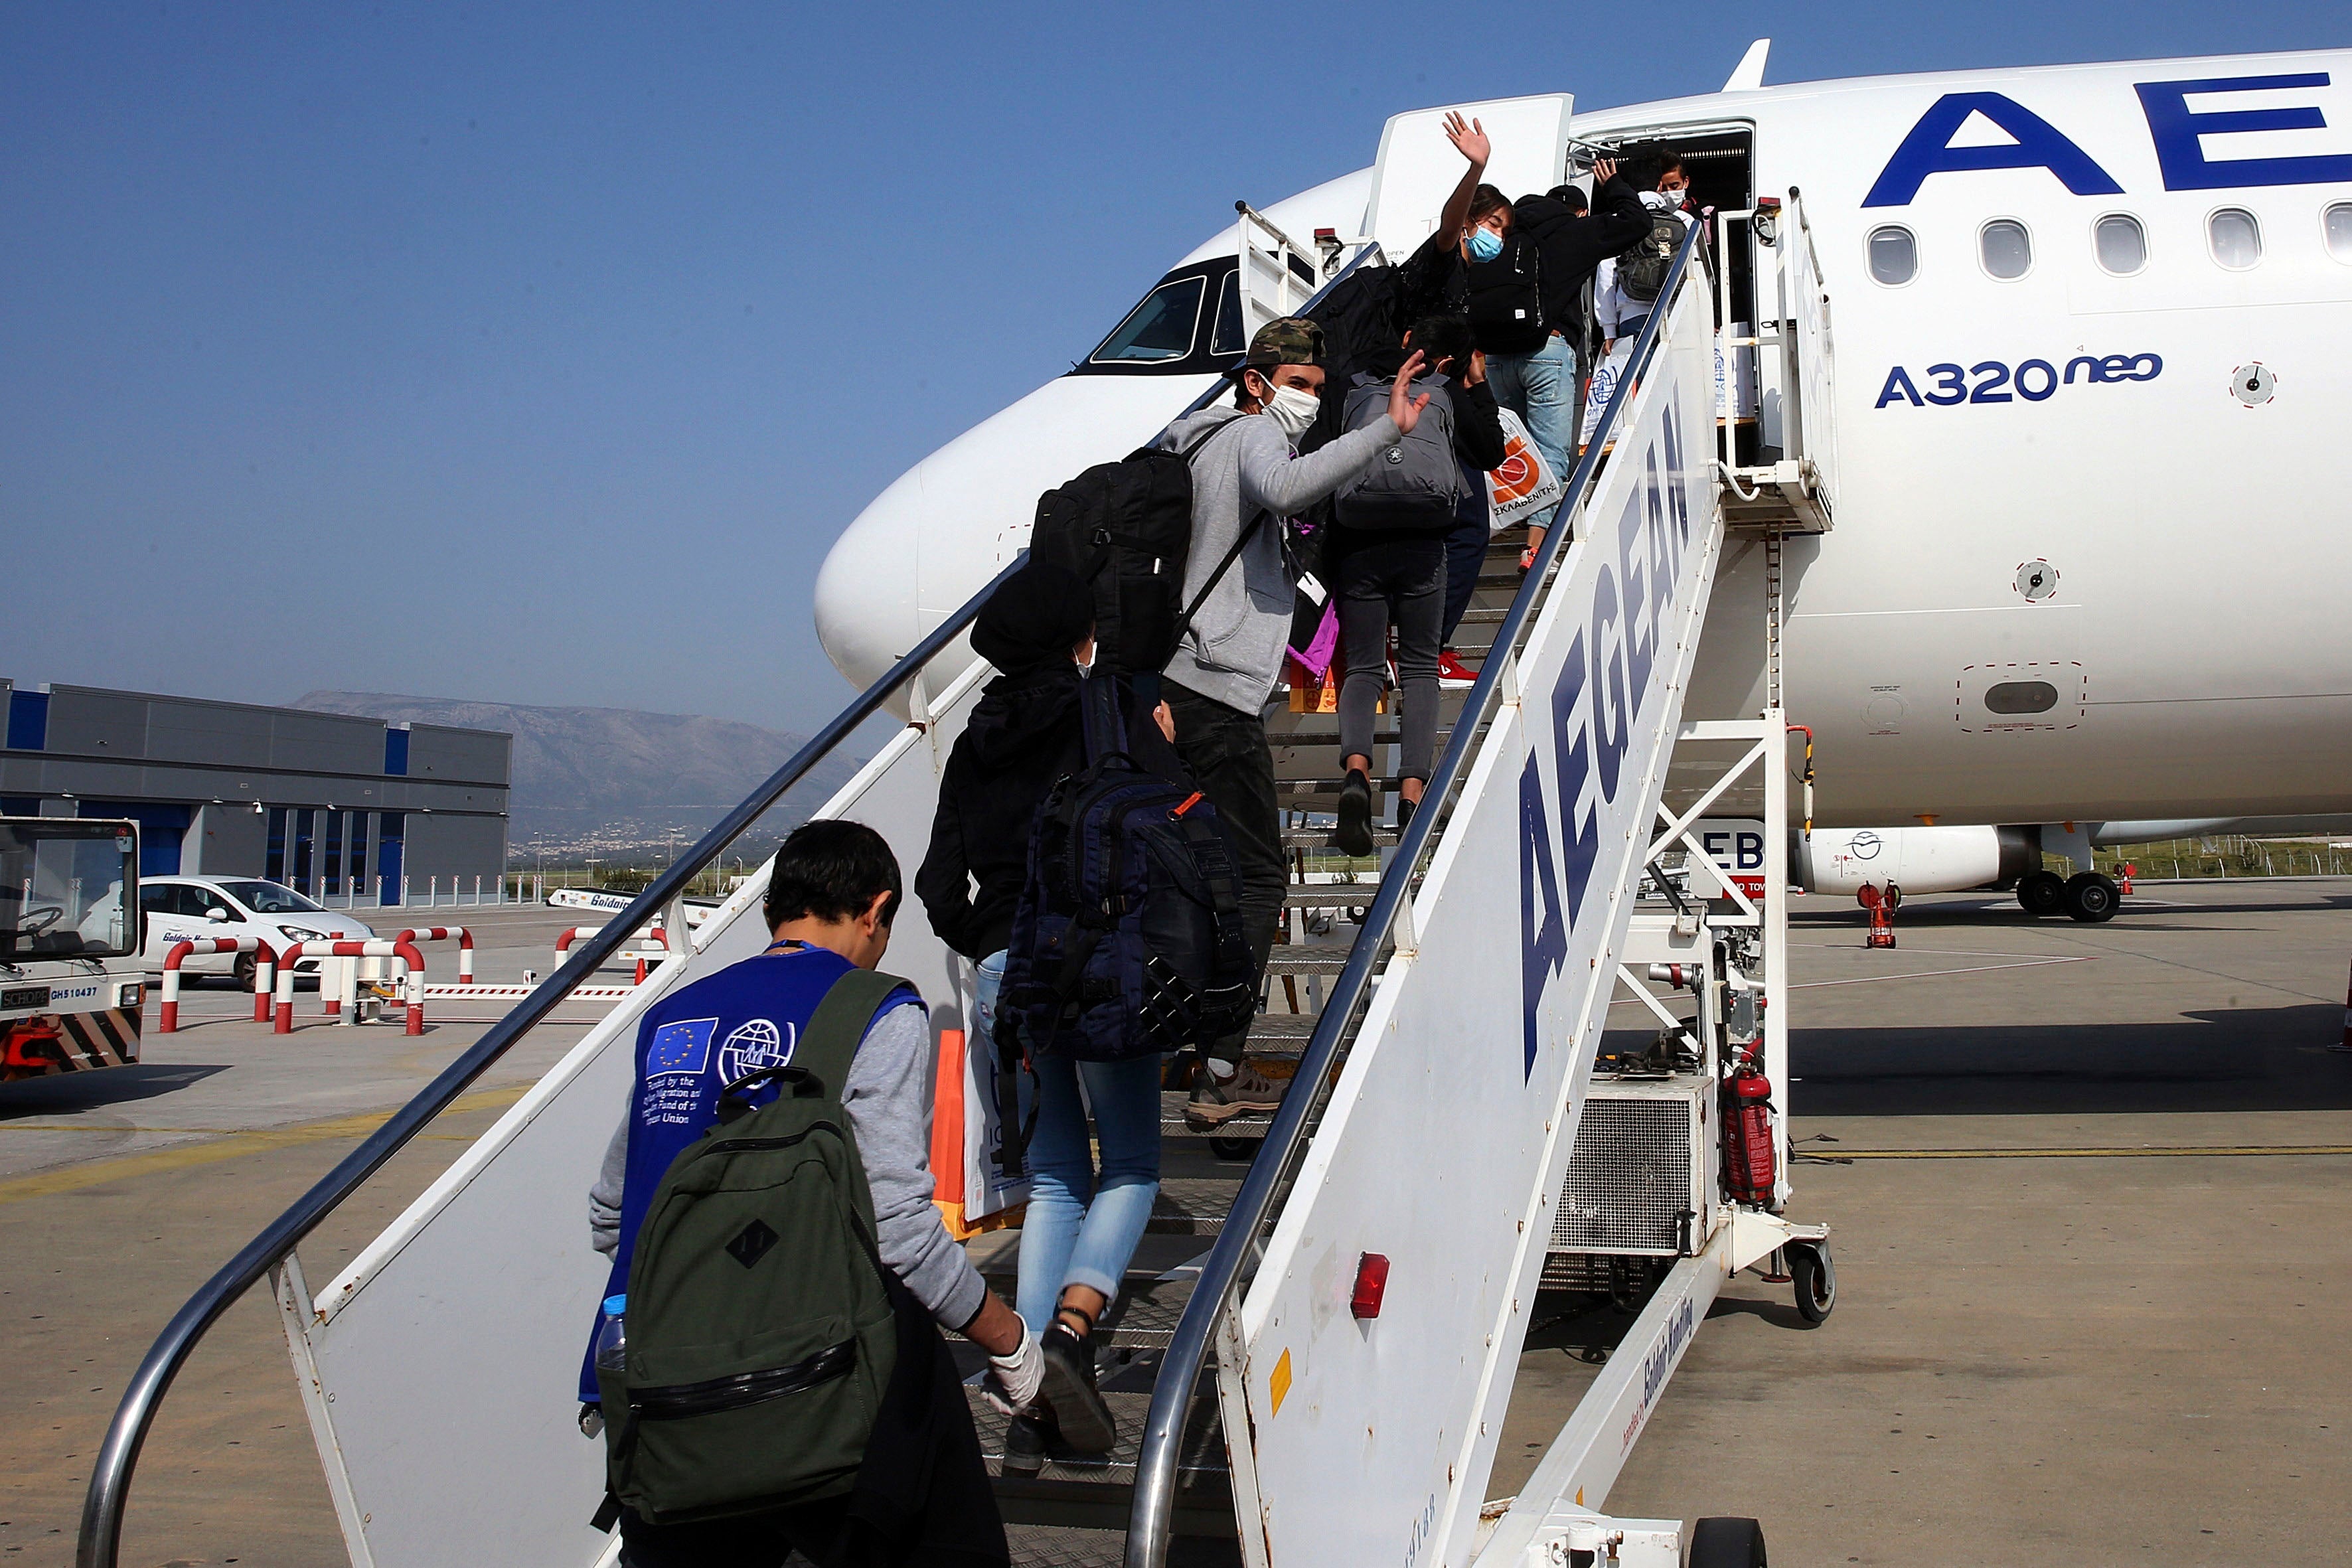 Unaccompanied children refugees from the overcrowded migrant camps on the north Aegean Sea islands, Greece, board a plane at the Eleftherios Venizelos International Airport in Athens to travel to Luxembourg, on Wednesday, April 15, 2020.